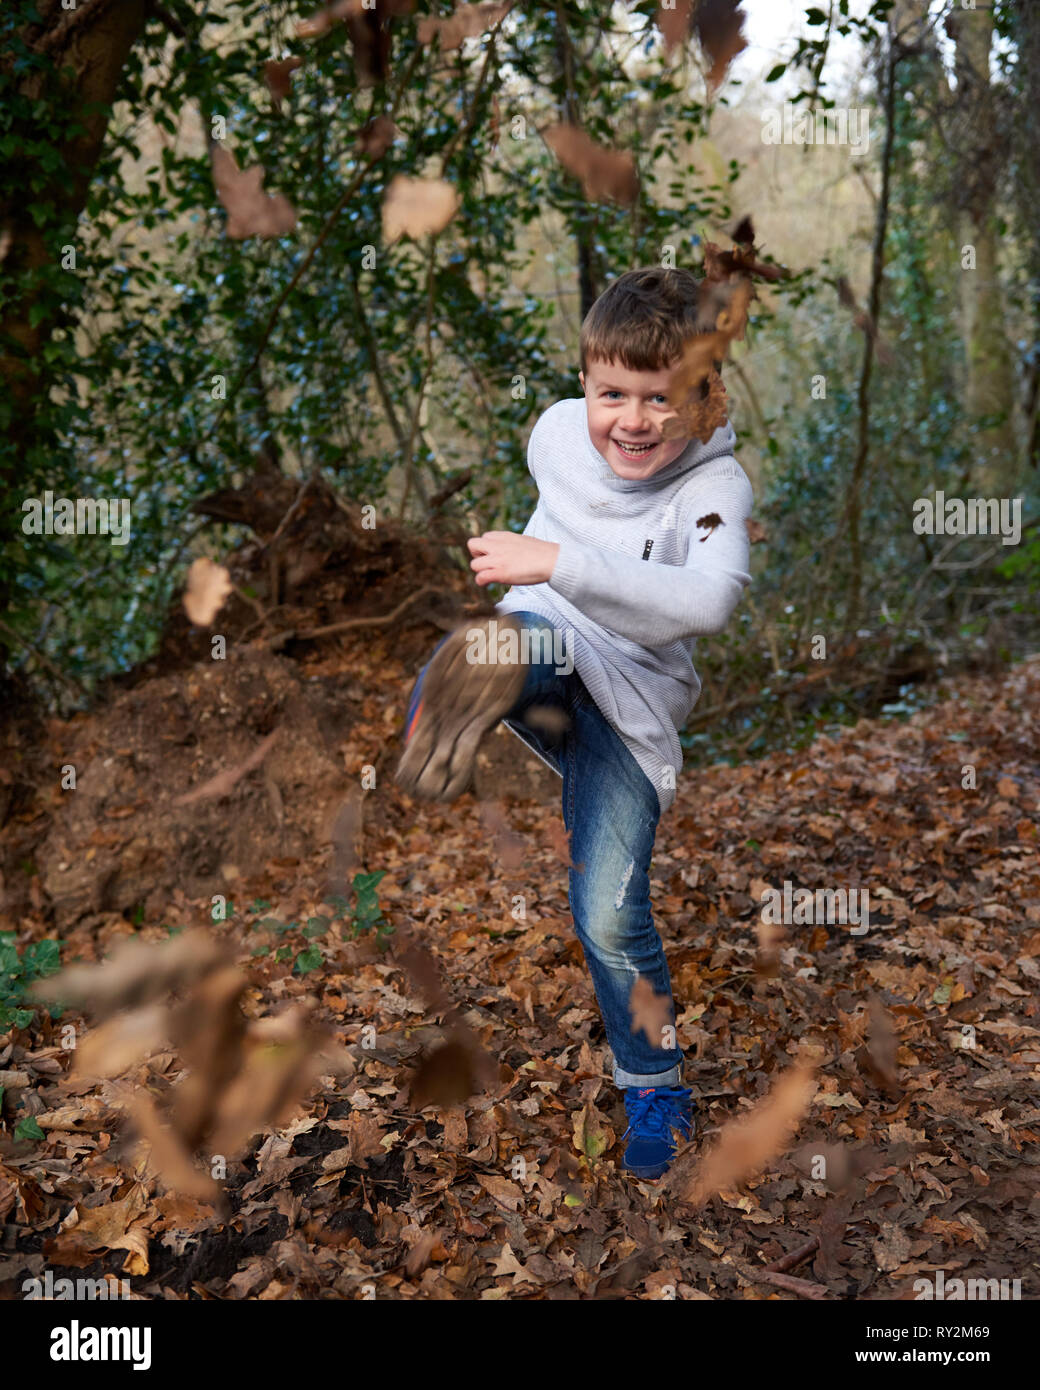 Childhood freedom to play outdoors. Kicking leaves on a woodland walk. A dynamic 3D effect image. Stock Photo